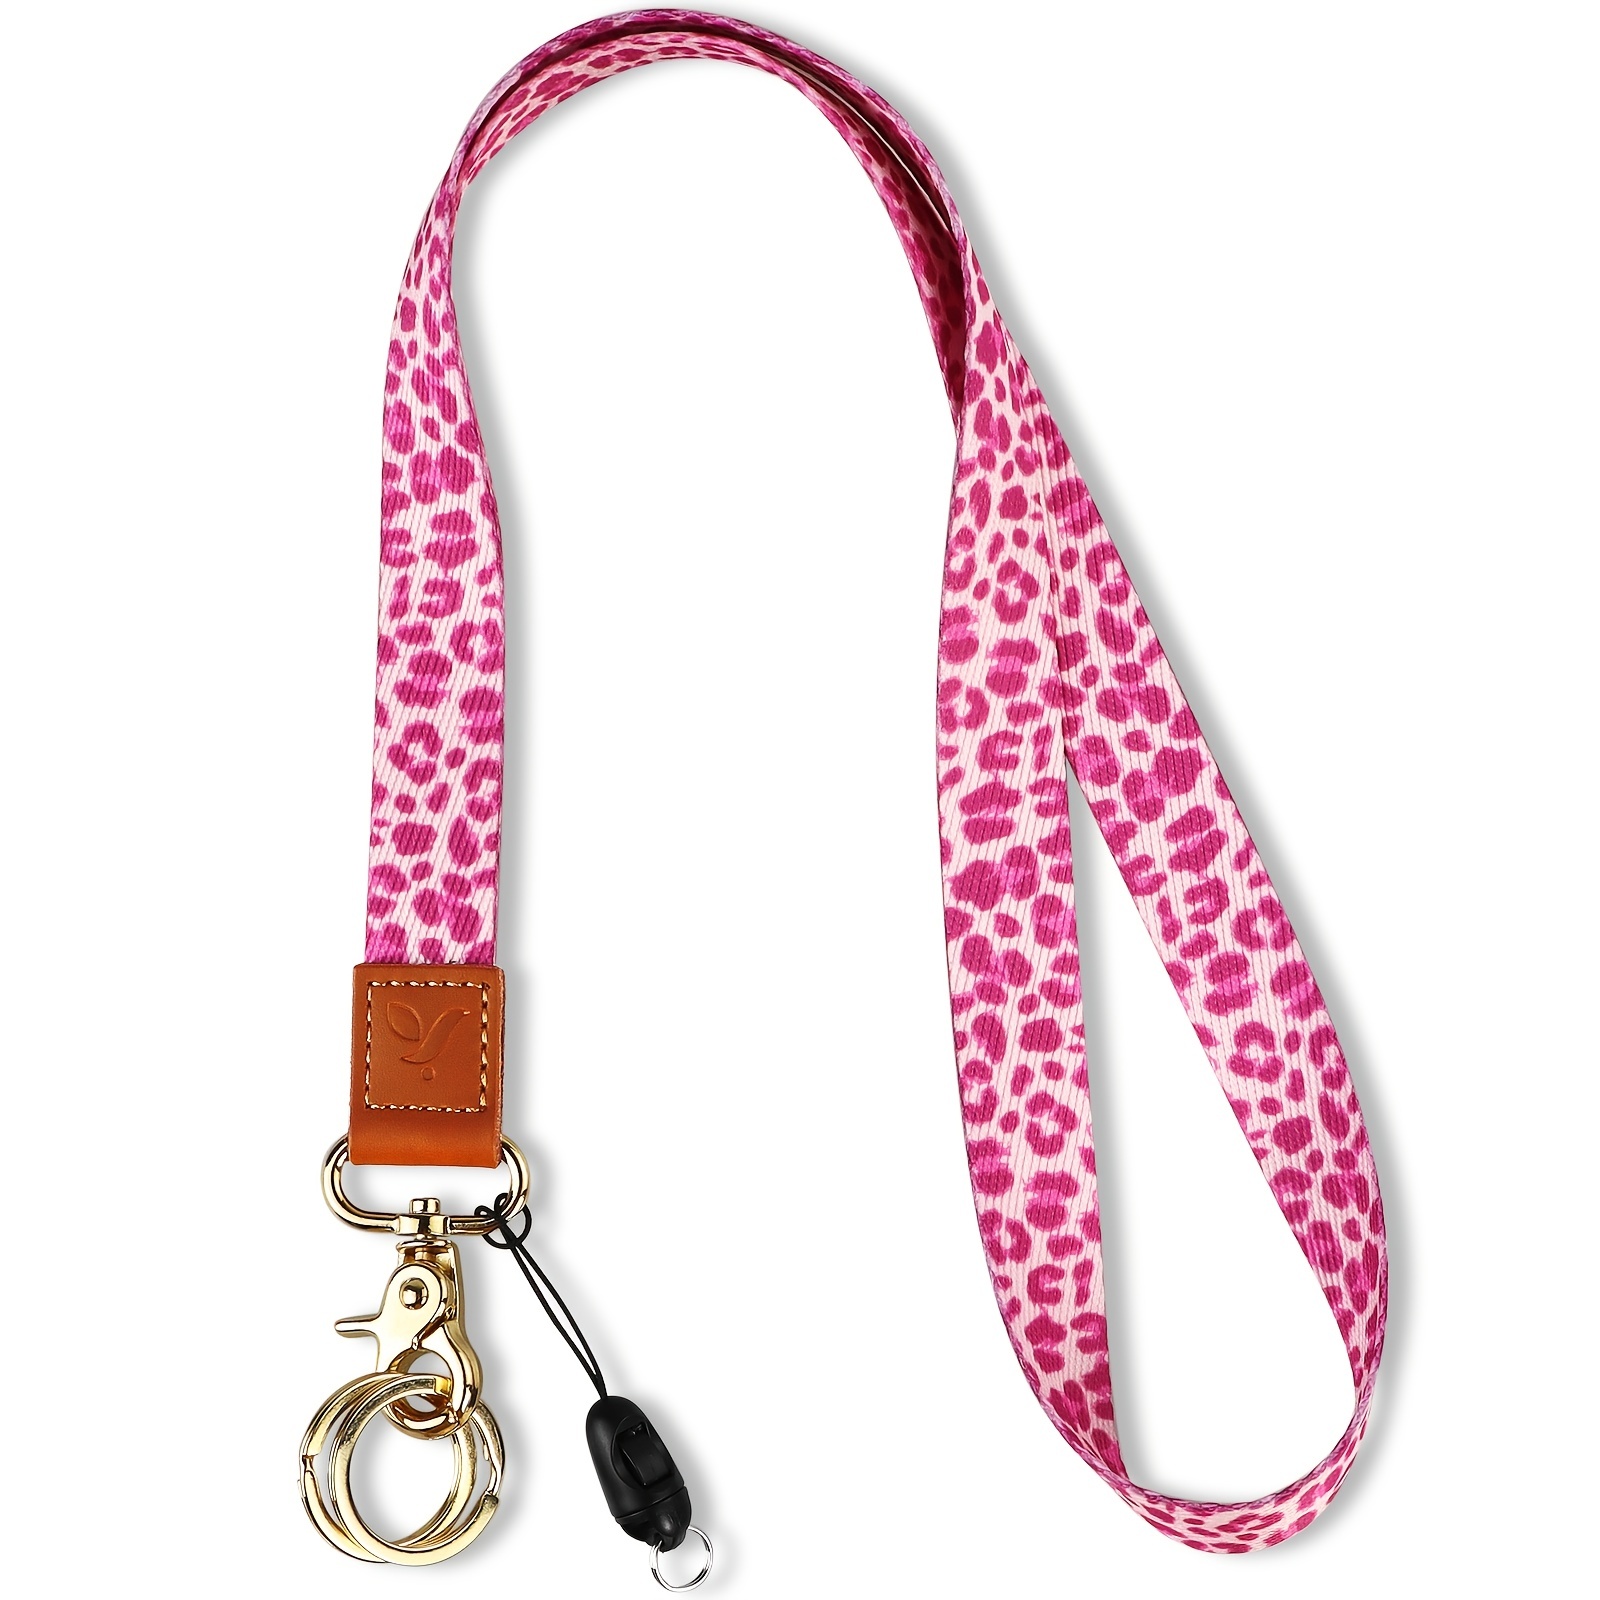 1pc * Leopard Badge Lanyards With Clip For ID Badges & Keys, Cute Durable  Neck Lanyard Strap For Women Men Kids Teachers